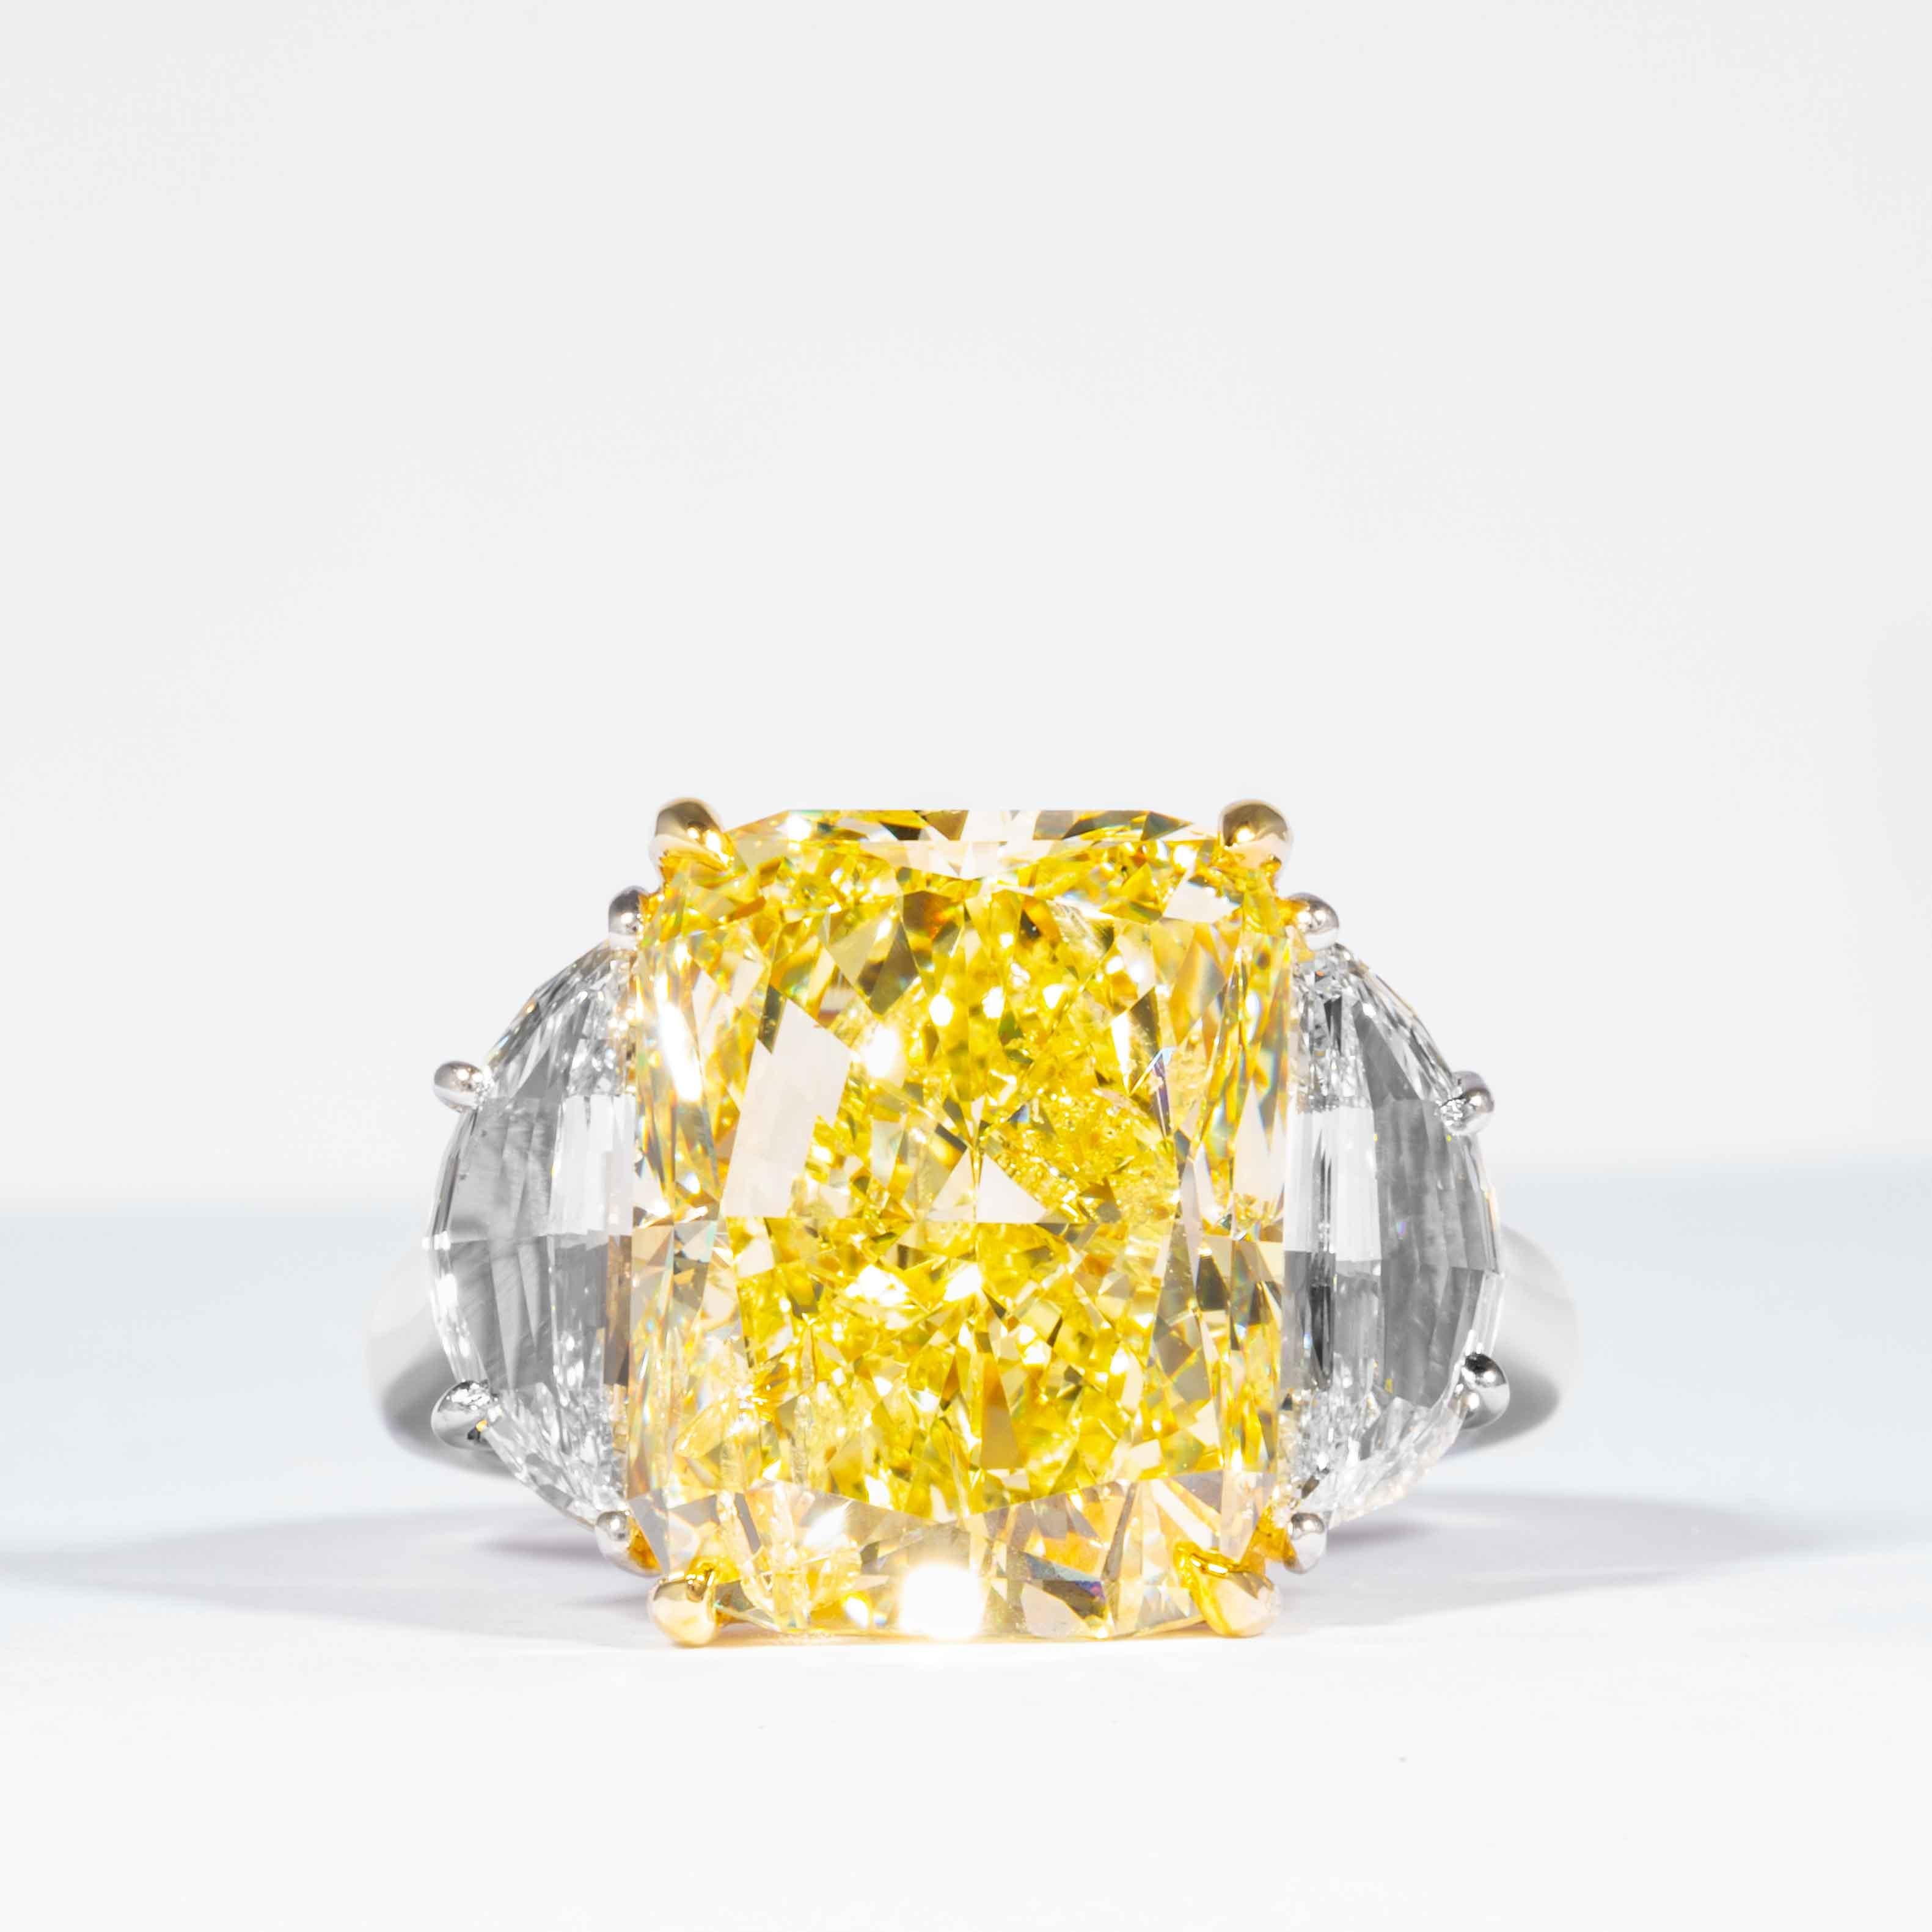 This fancy yellow radiant cut diamond is offered by Shreve, Crump & Low.  This fancy yellow radiant cut diamond is custom set in a handcrafted Shreve, Crump & Low platinum and 18 karat yellow gold 3 stone ring consisting of 1 radiant cut yellow